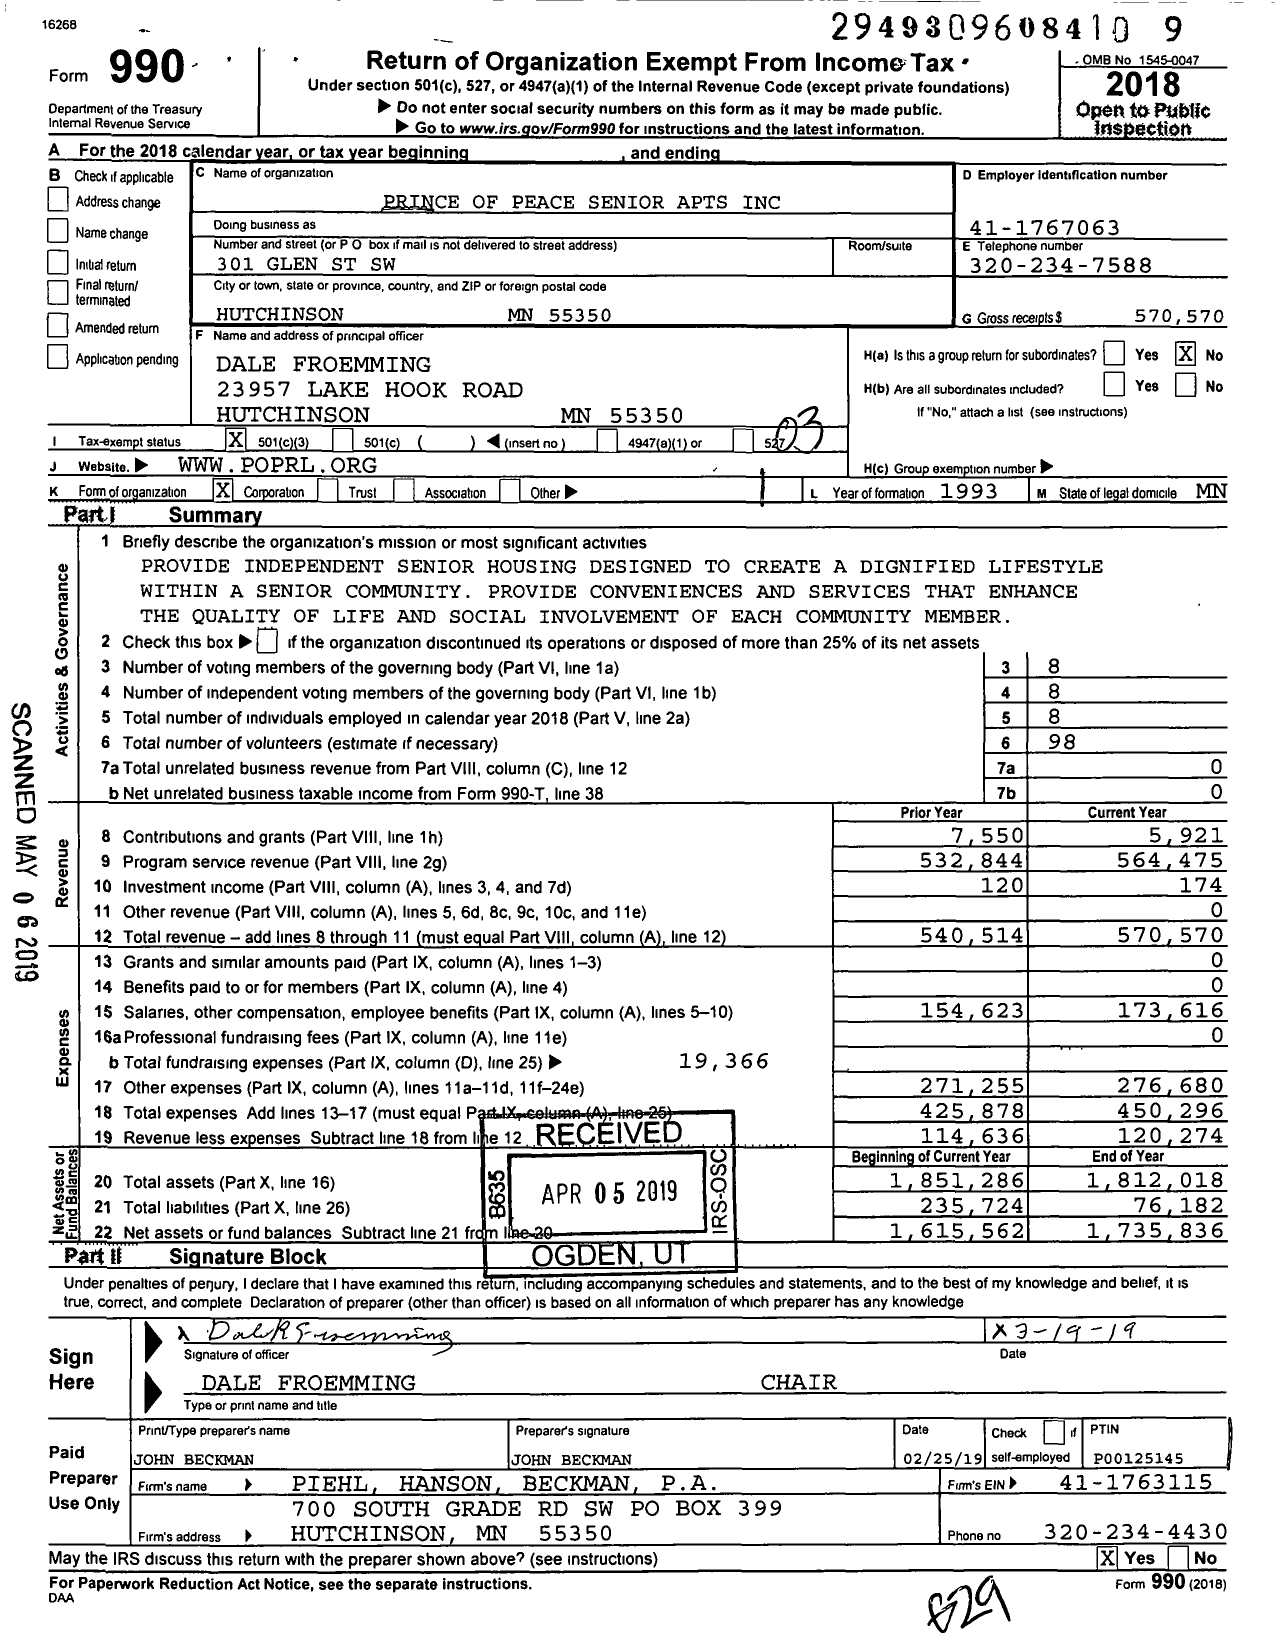 Image of first page of 2018 Form 990 for Prince of Peace Senior Apts